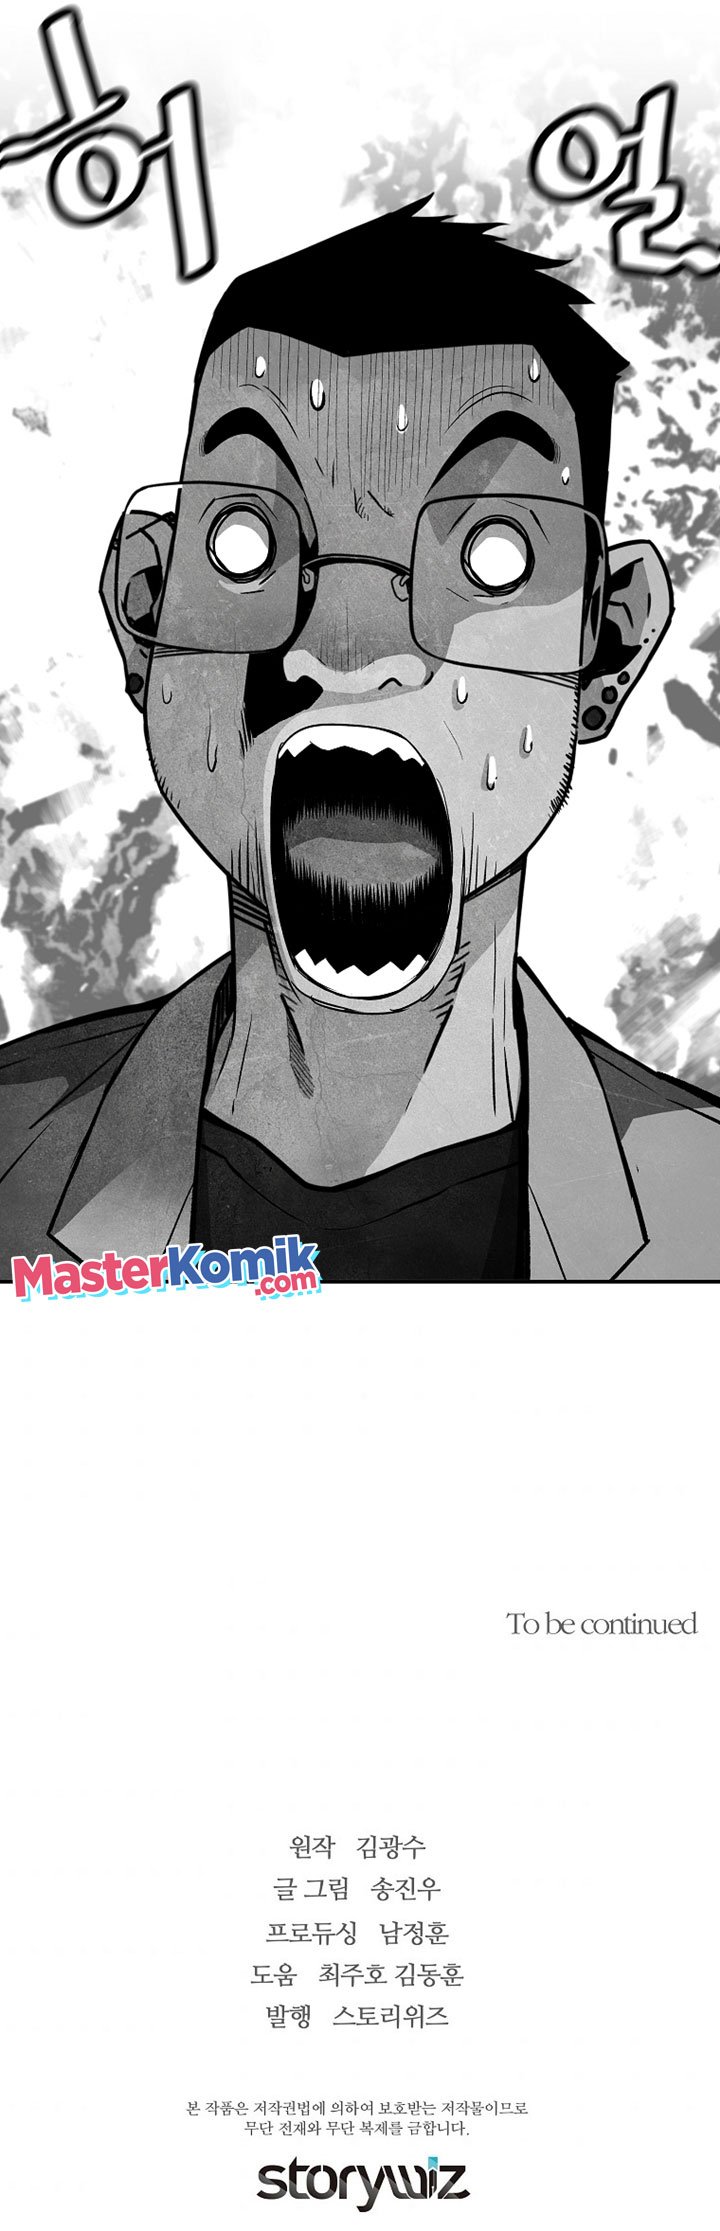 Return of the Legend Chapter 58